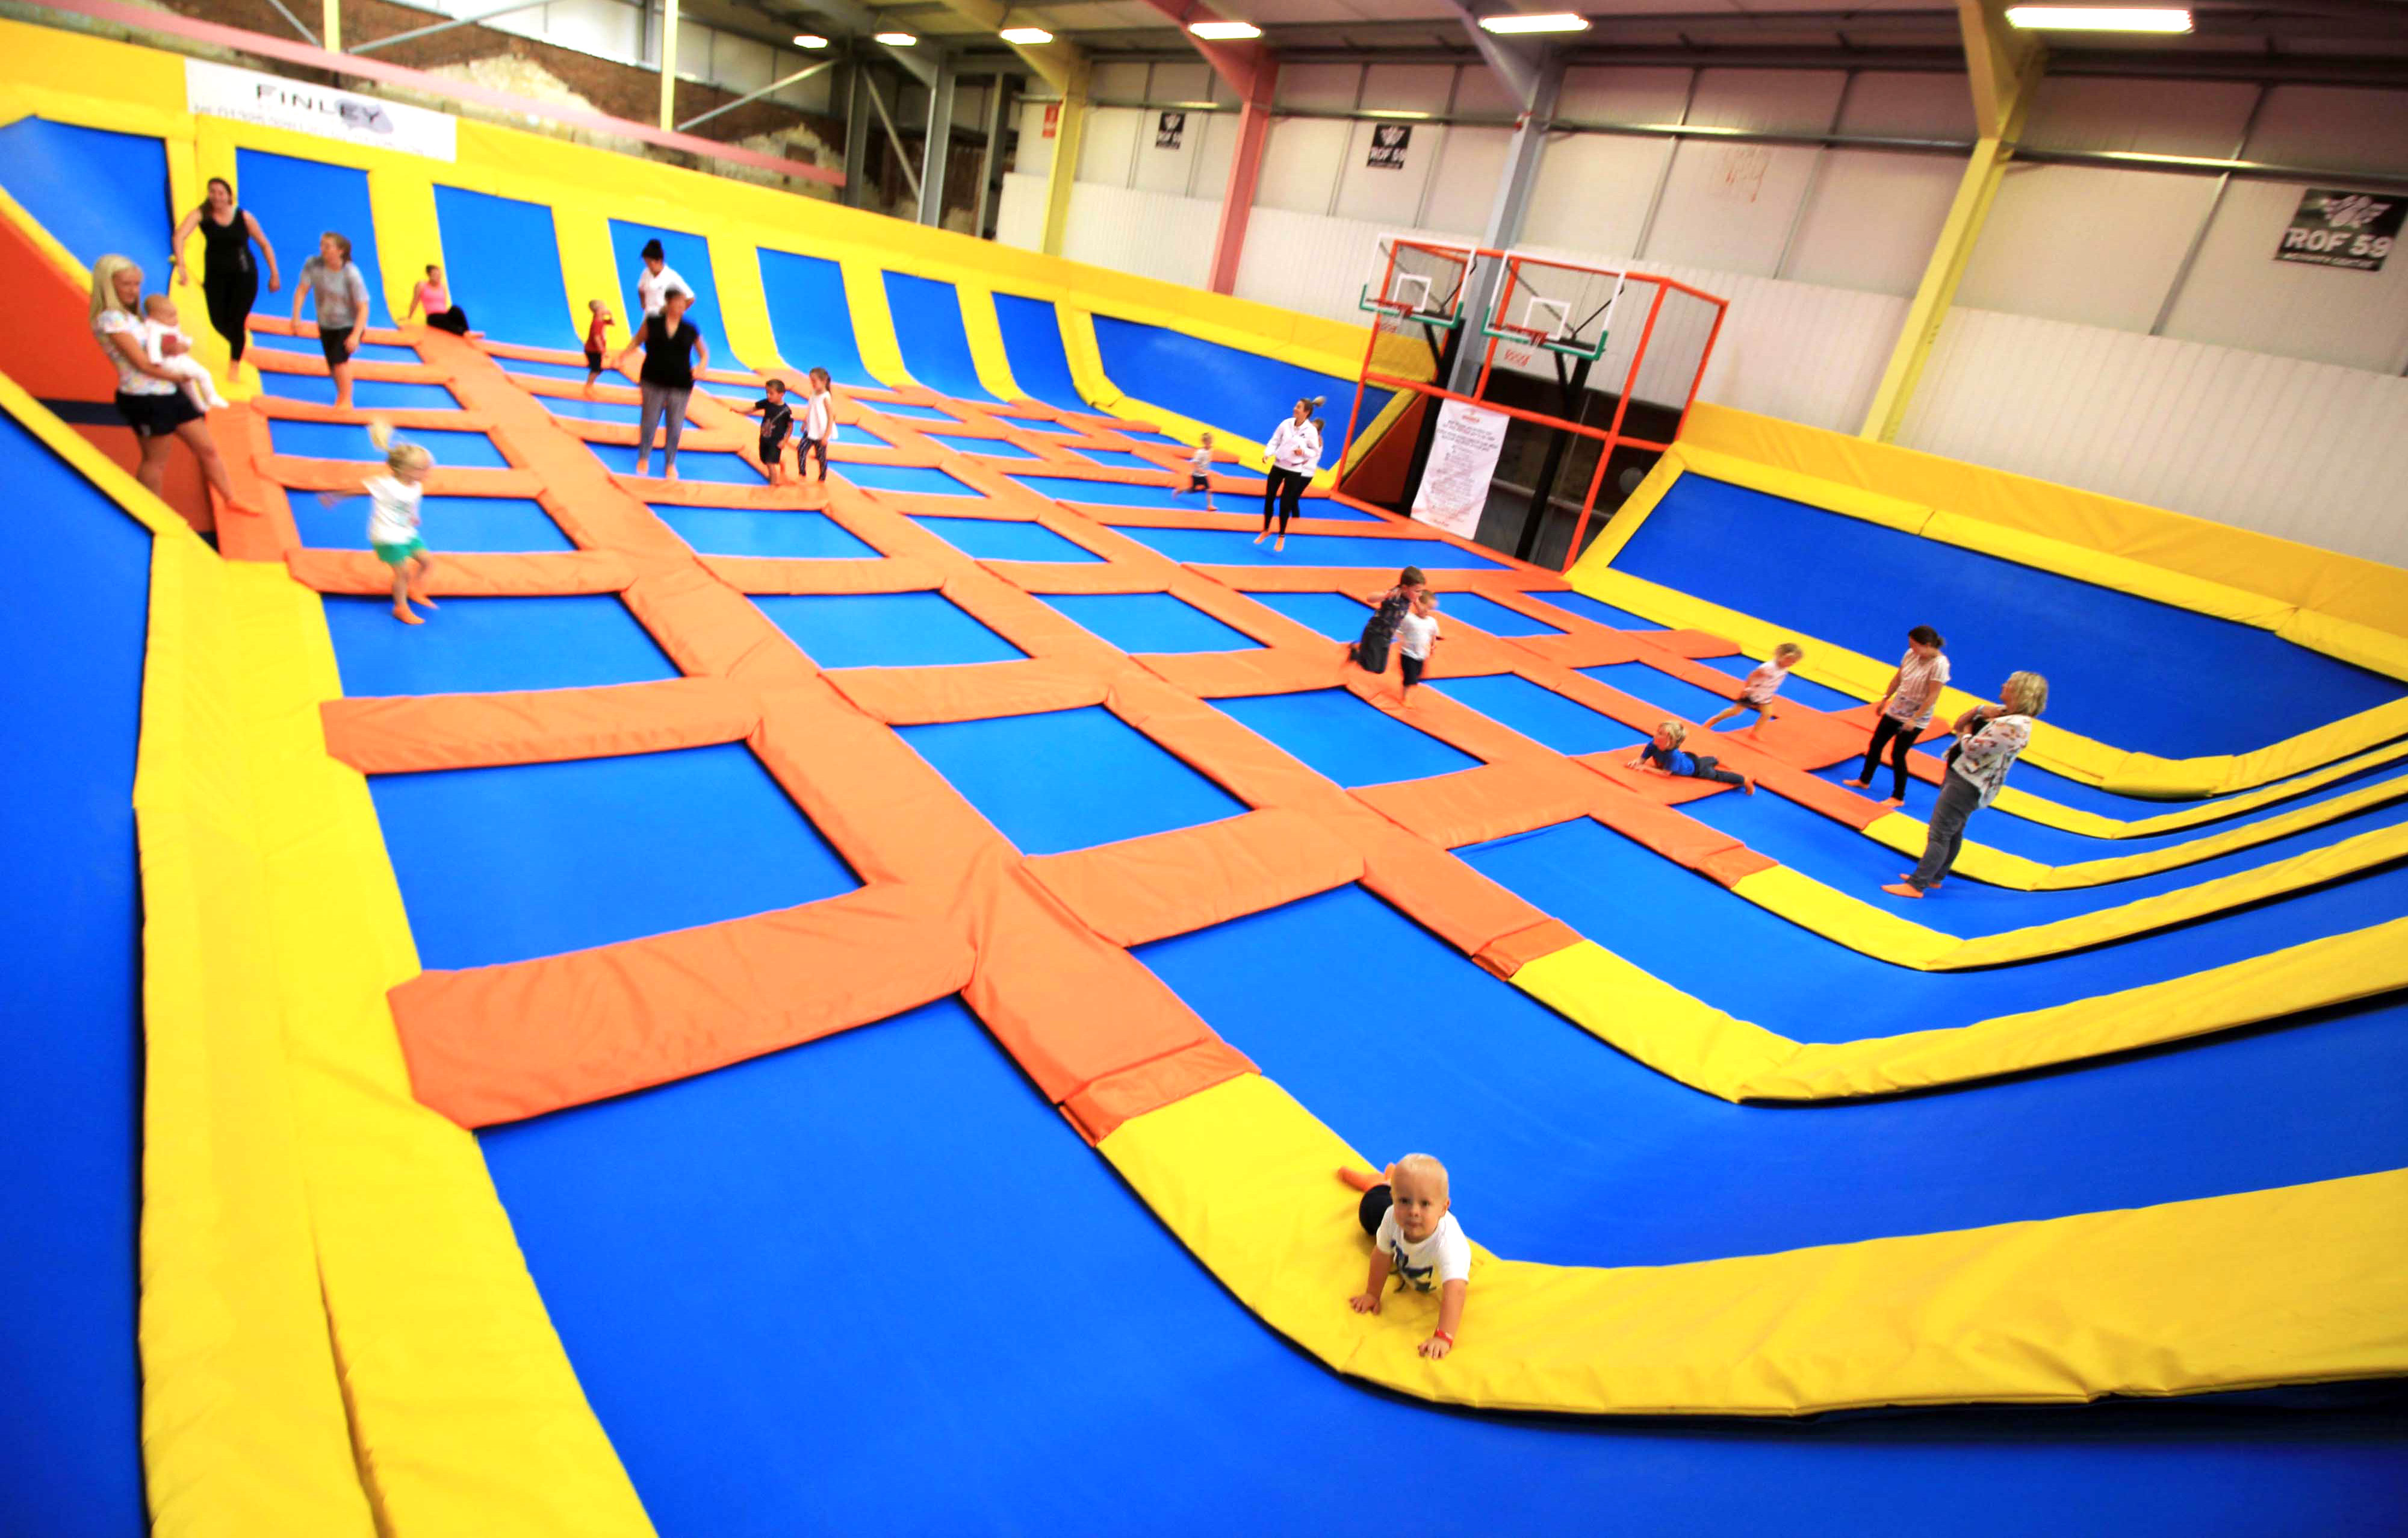 Big Bounce Opens at Aycliffe’s ROF 59 Activity Centre